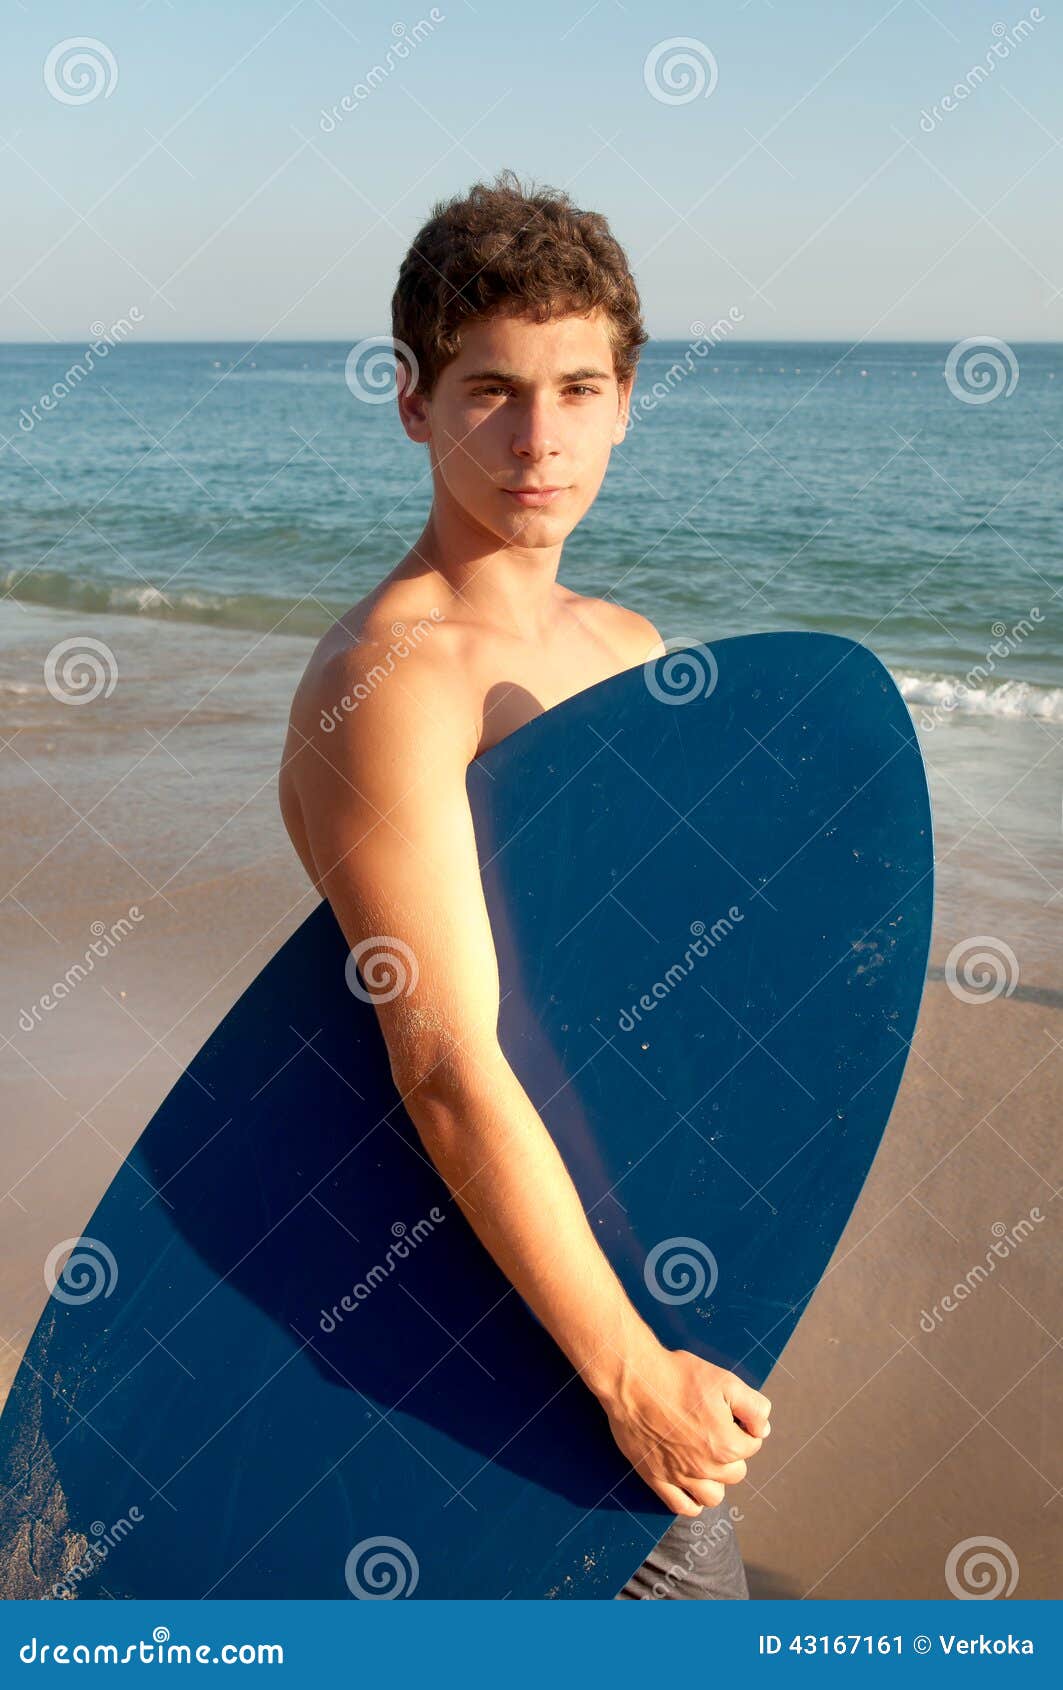 Teenage boy stock image. Image of bright, passion, handsome - 43167161